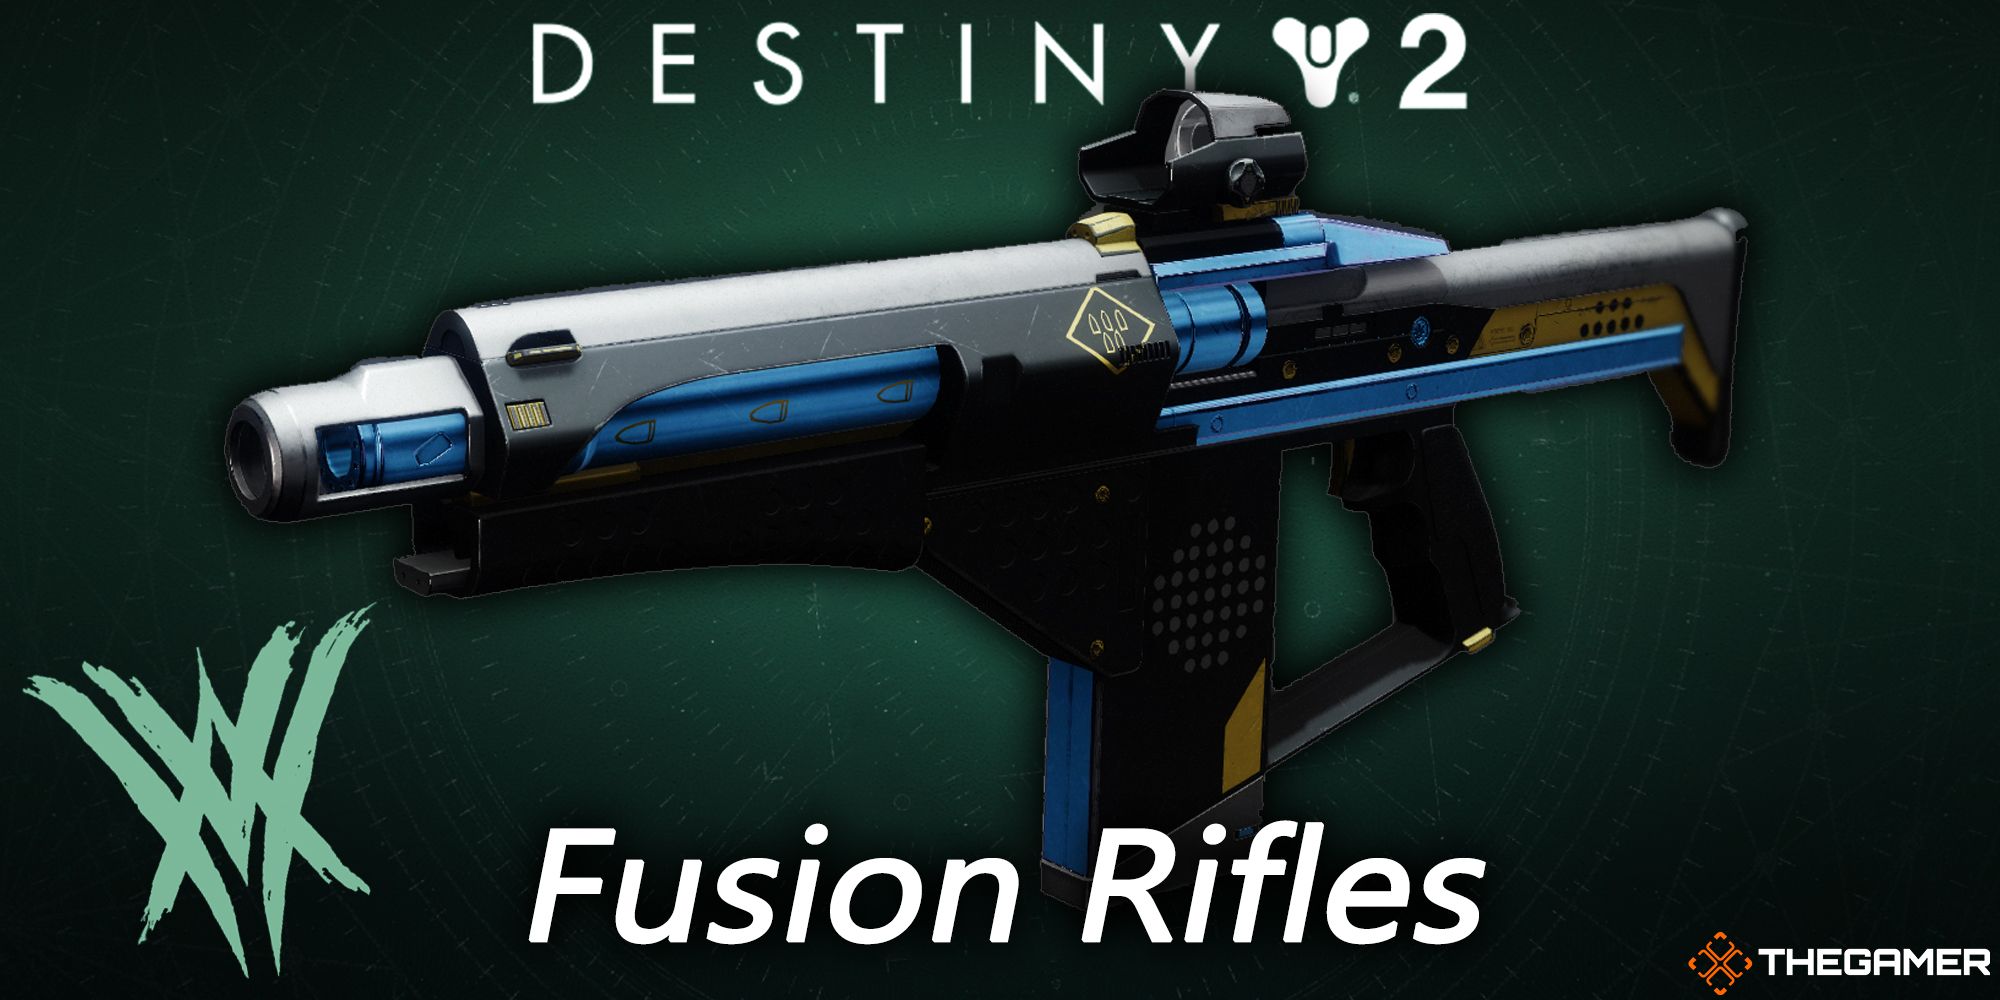 Fusion Rifles, Null Composure a fusion rifle from Destiny 2